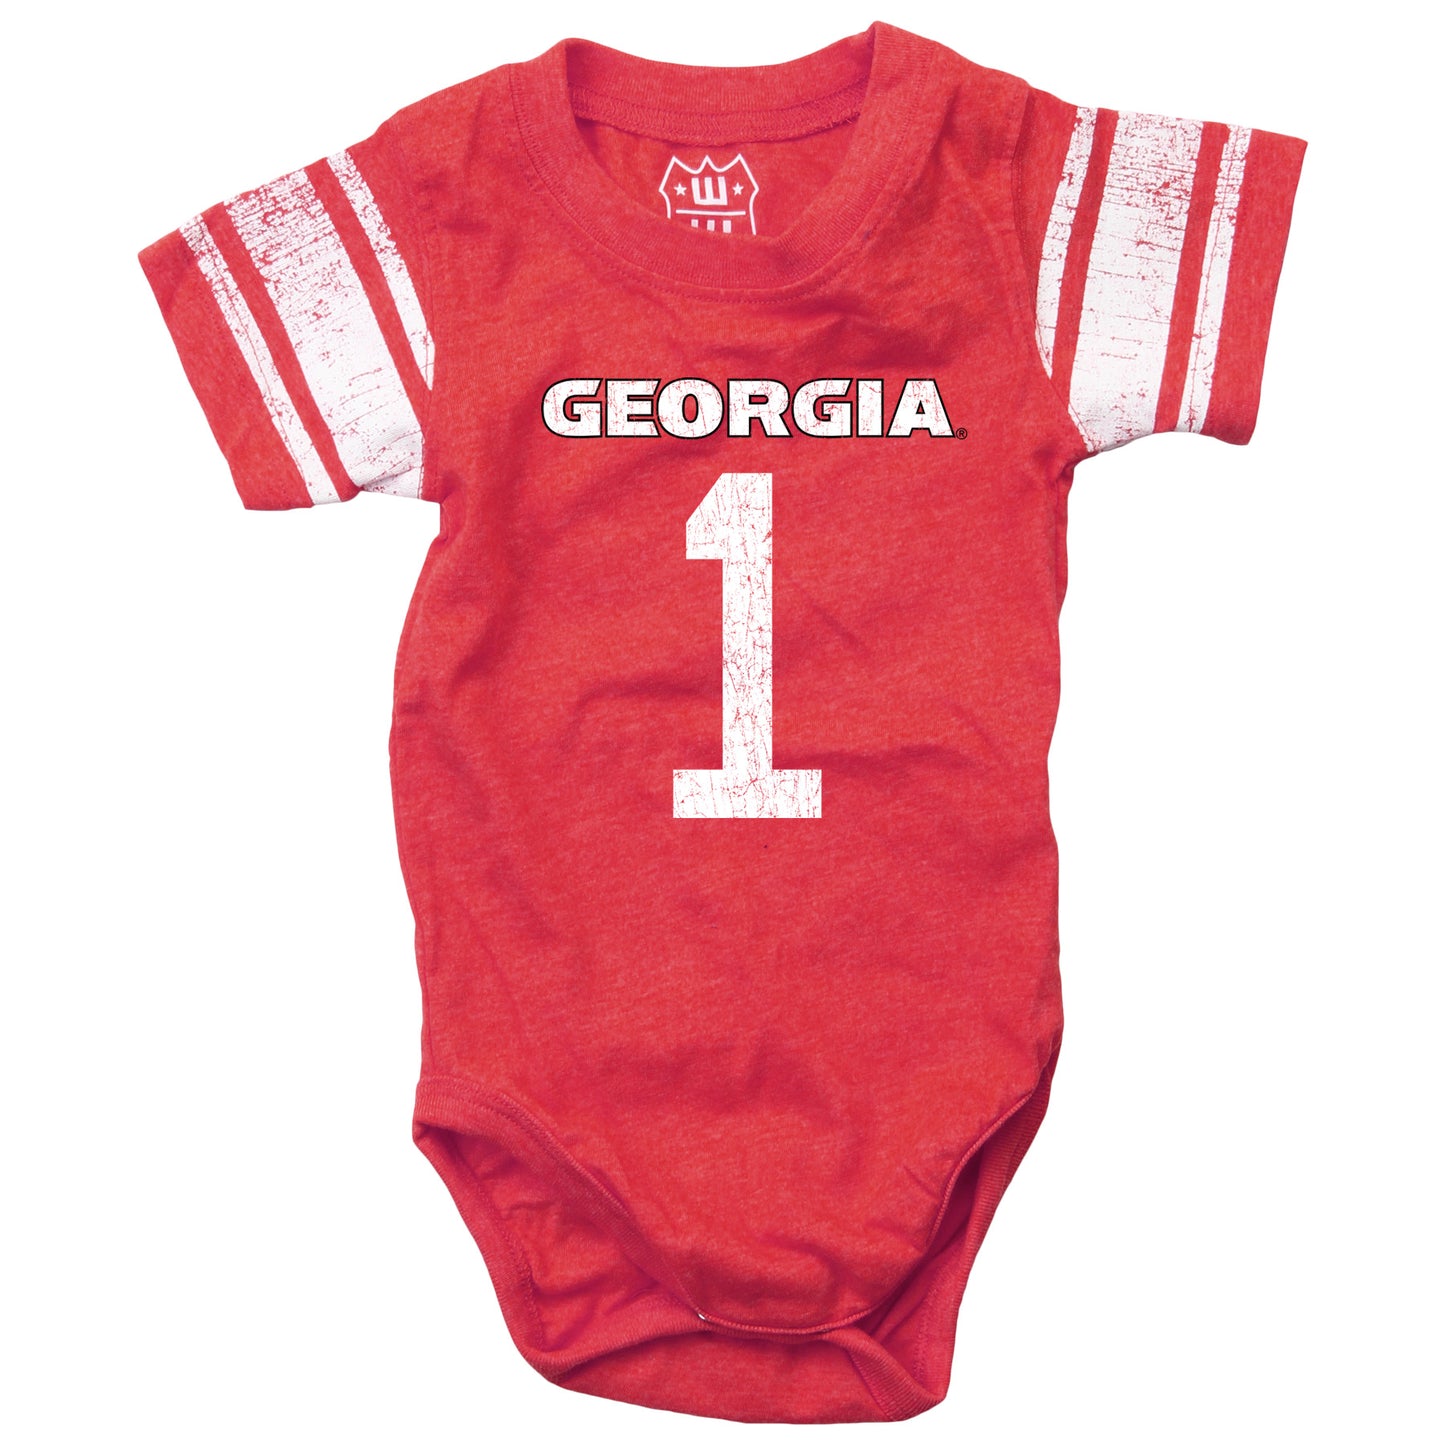 Georgia Bulldogs Wes and Willy Baby College One Piece Jersey Bodysuit